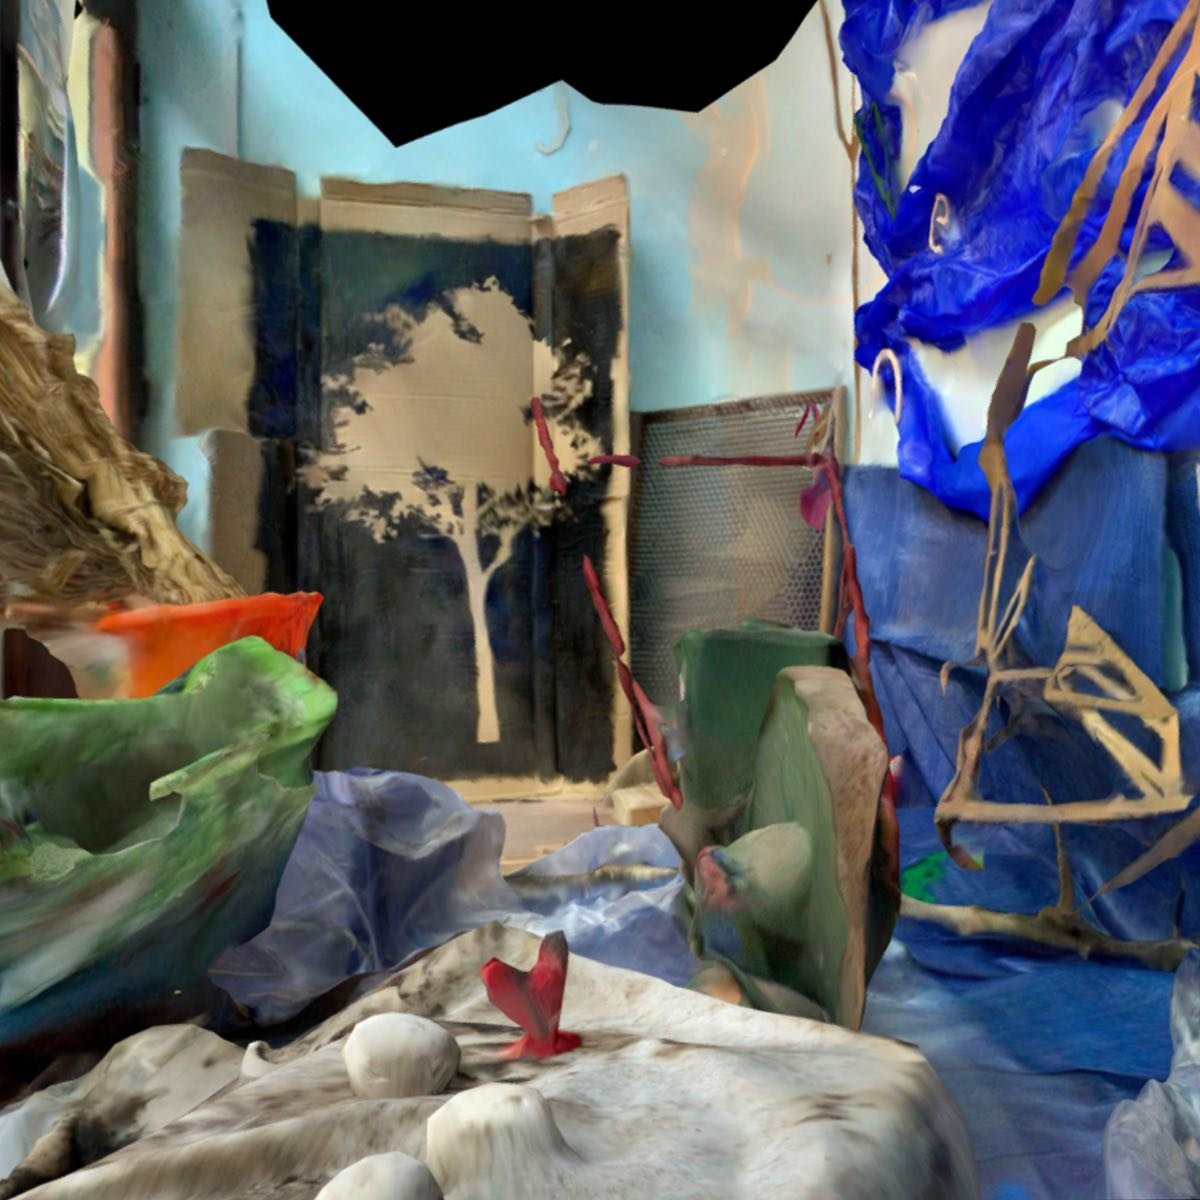 The physical installation in @hepworthsarcade will soon come down, but a 3D capture of the S U N K diorama - a precarious, remote, geometric disassemblage - can now be navigated on the project webpage.

(Mesh - Environment - Material)

#shiftingbasel